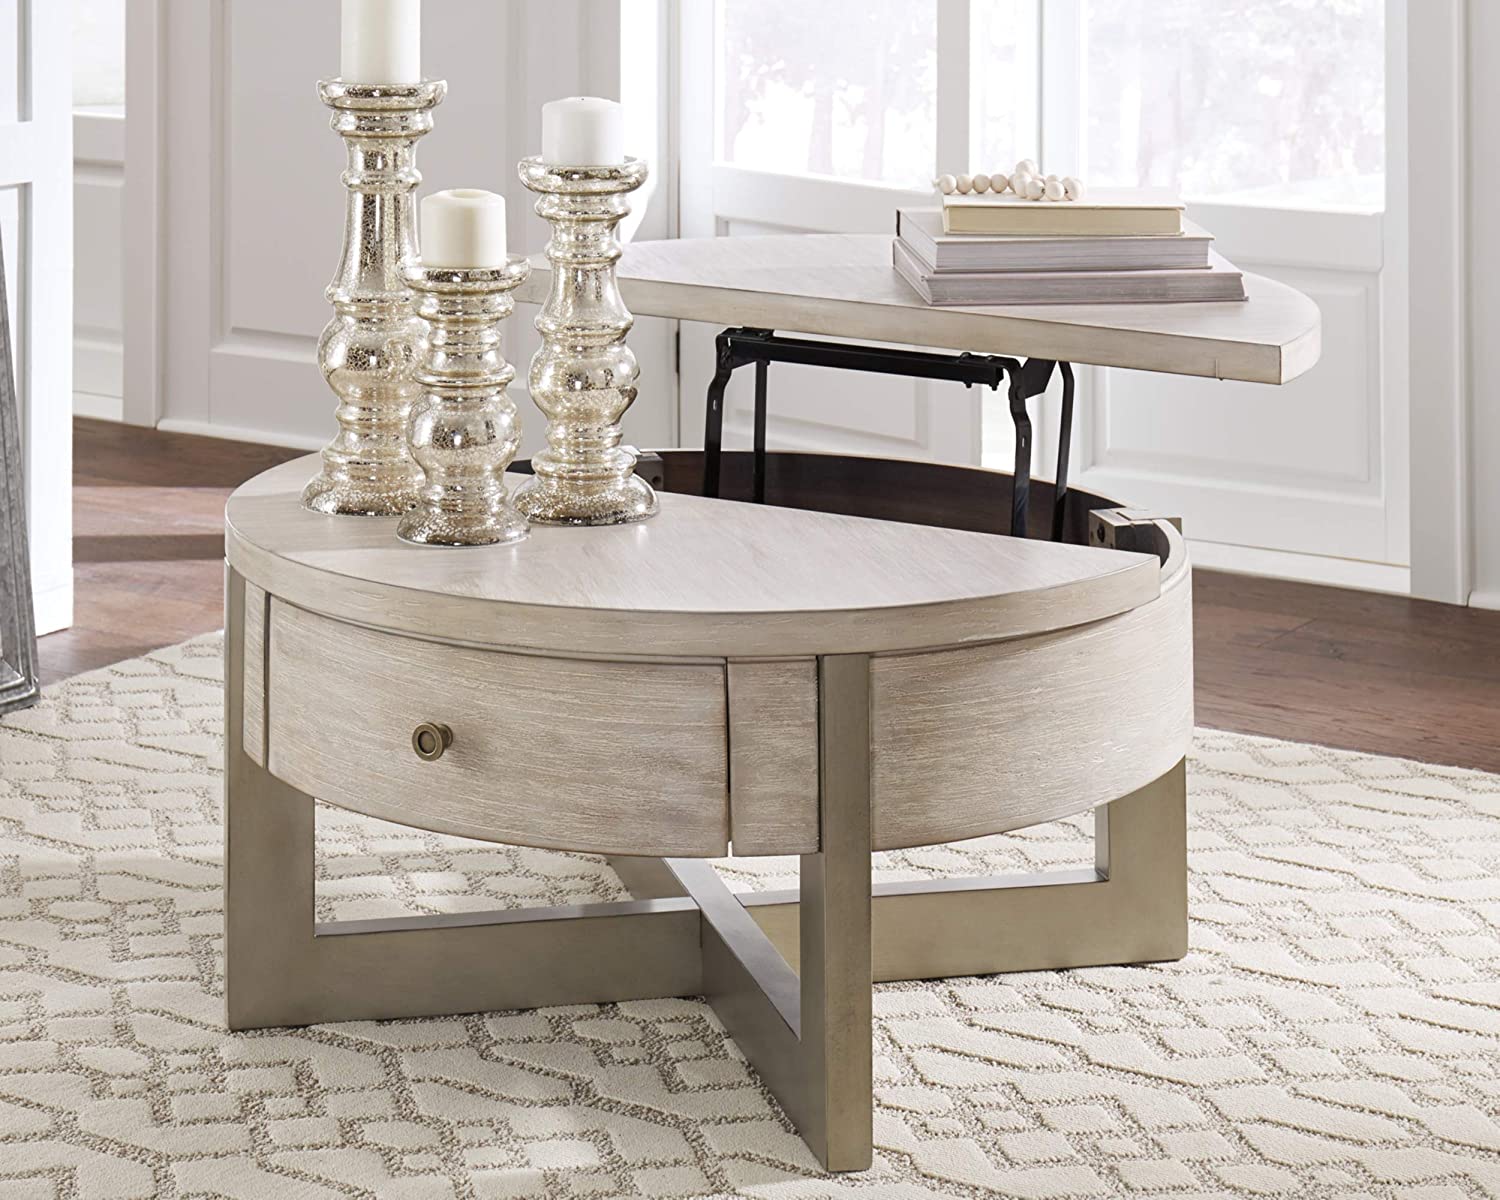 Round Lift Top Coffee Table With Storage White Natural : Modern Round